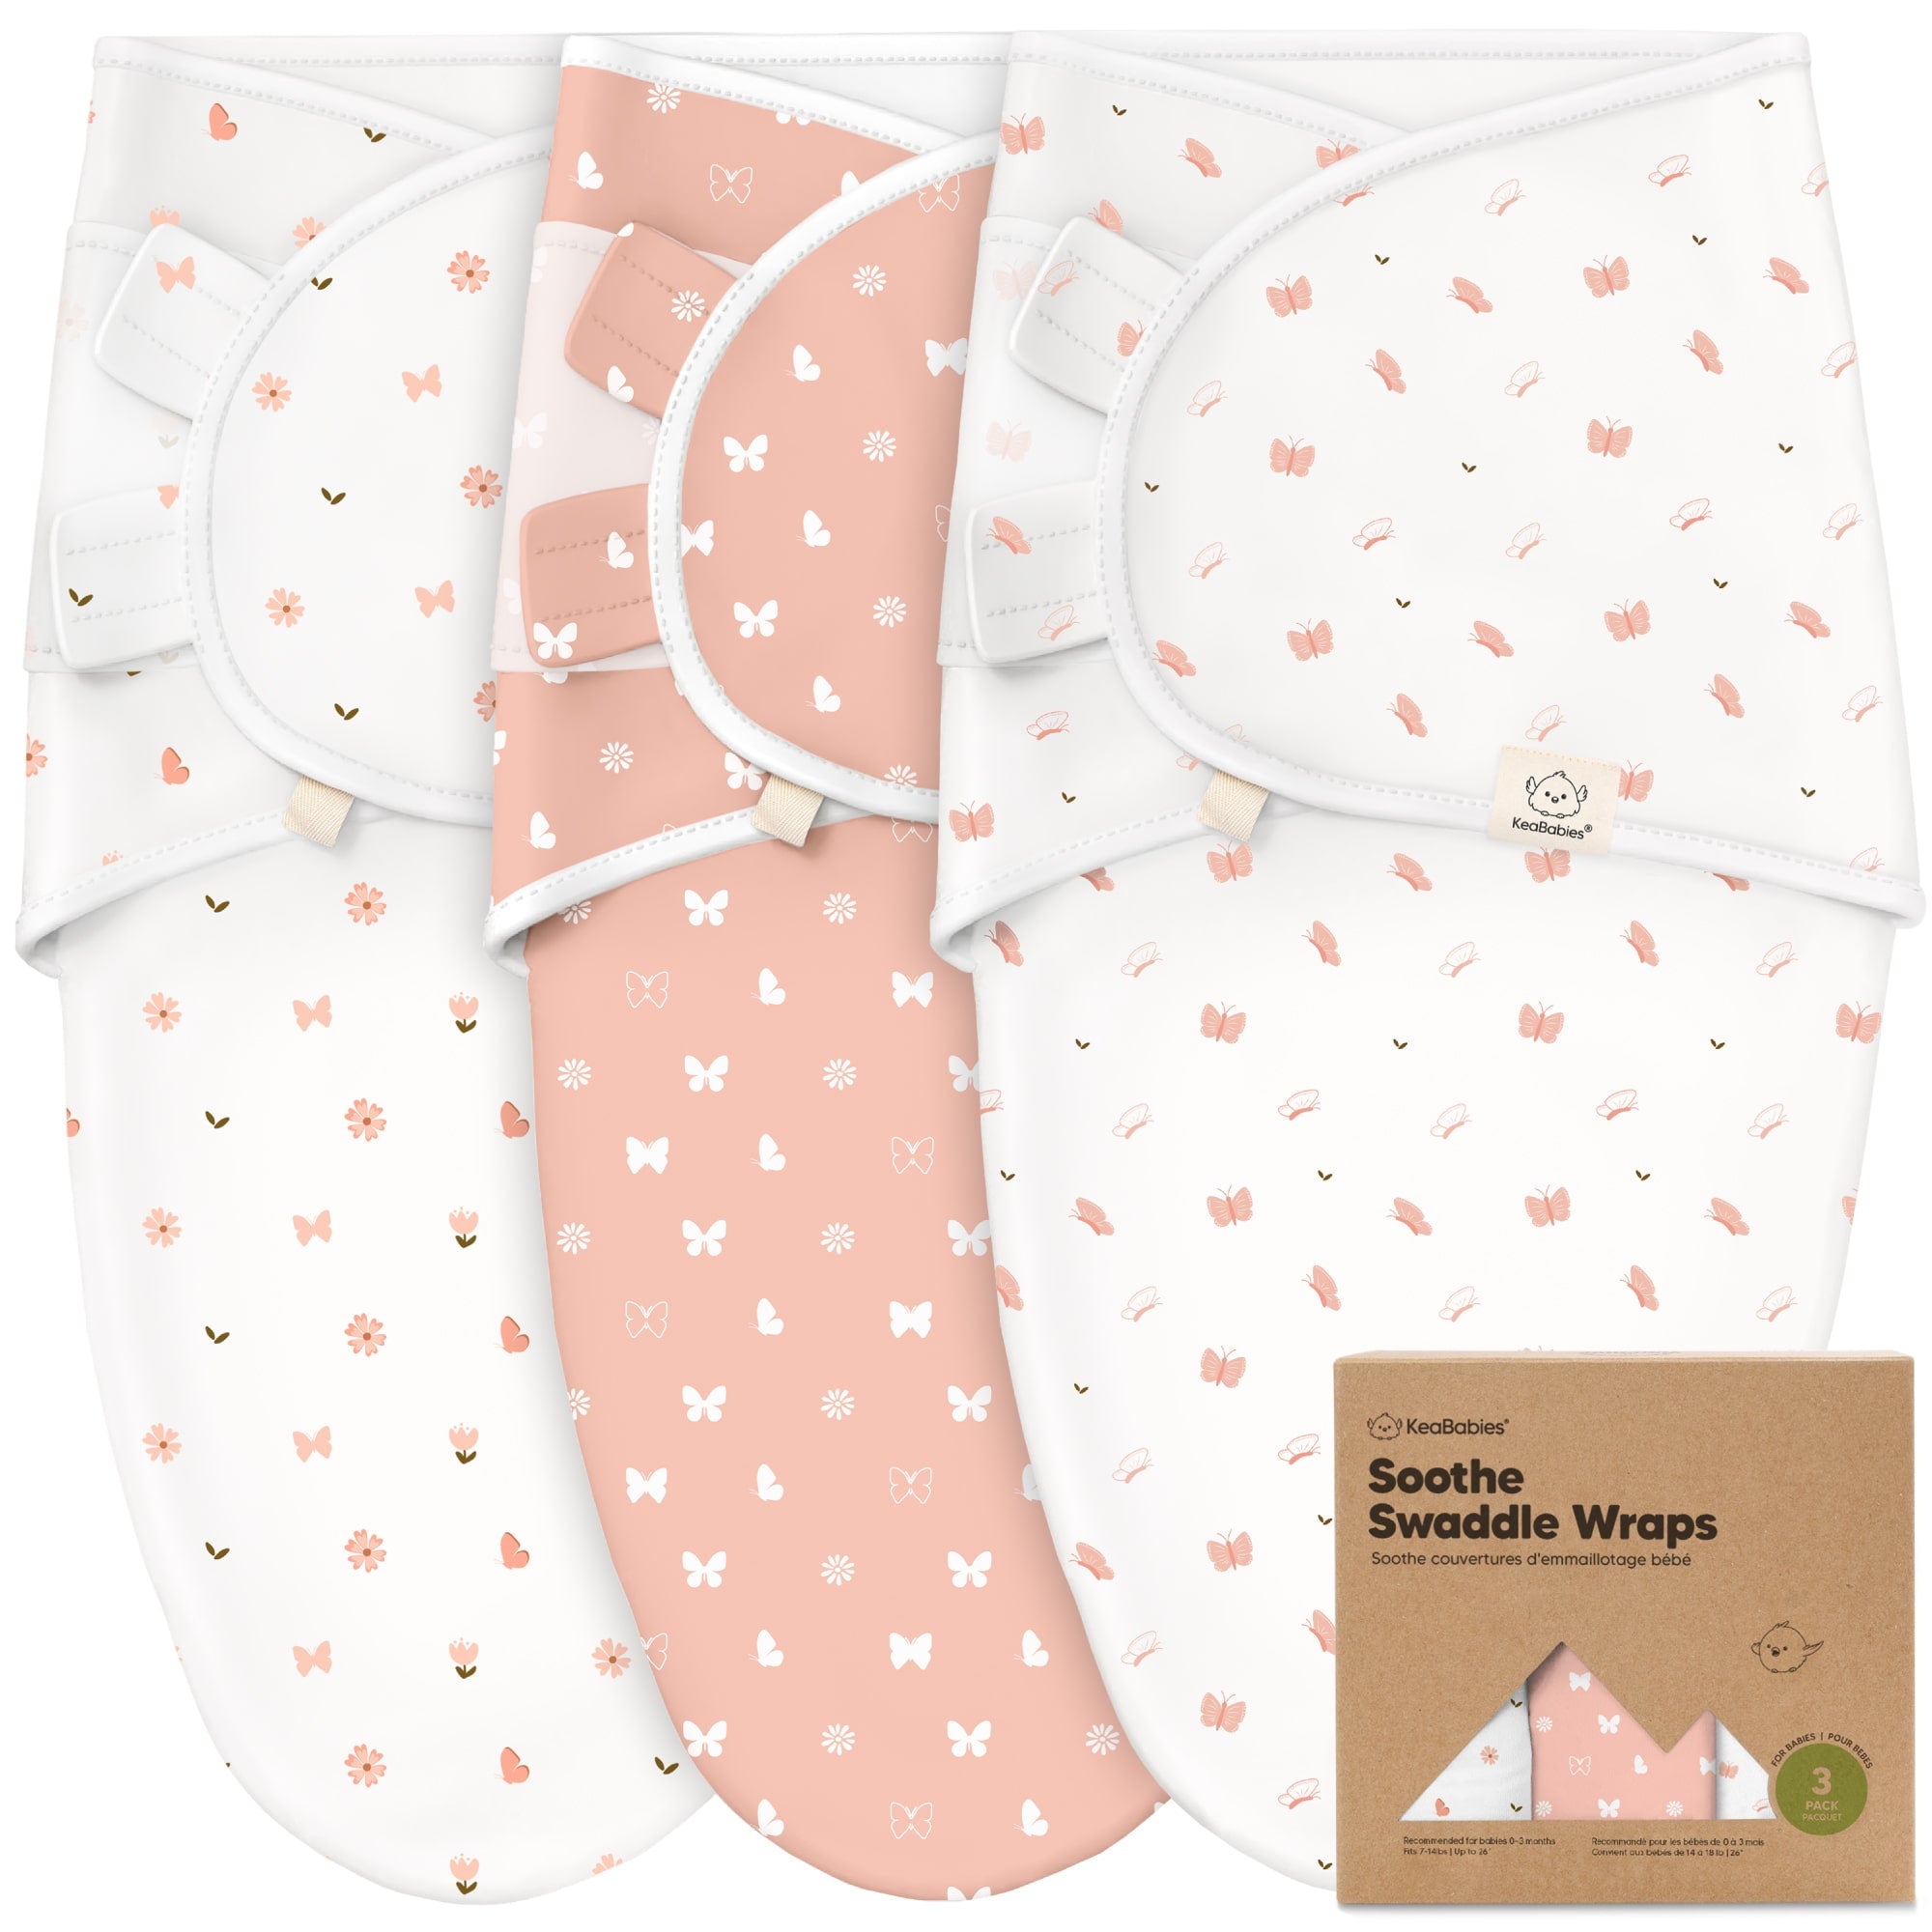 Wrap-E-Soothe Suit - Full body (one pack)